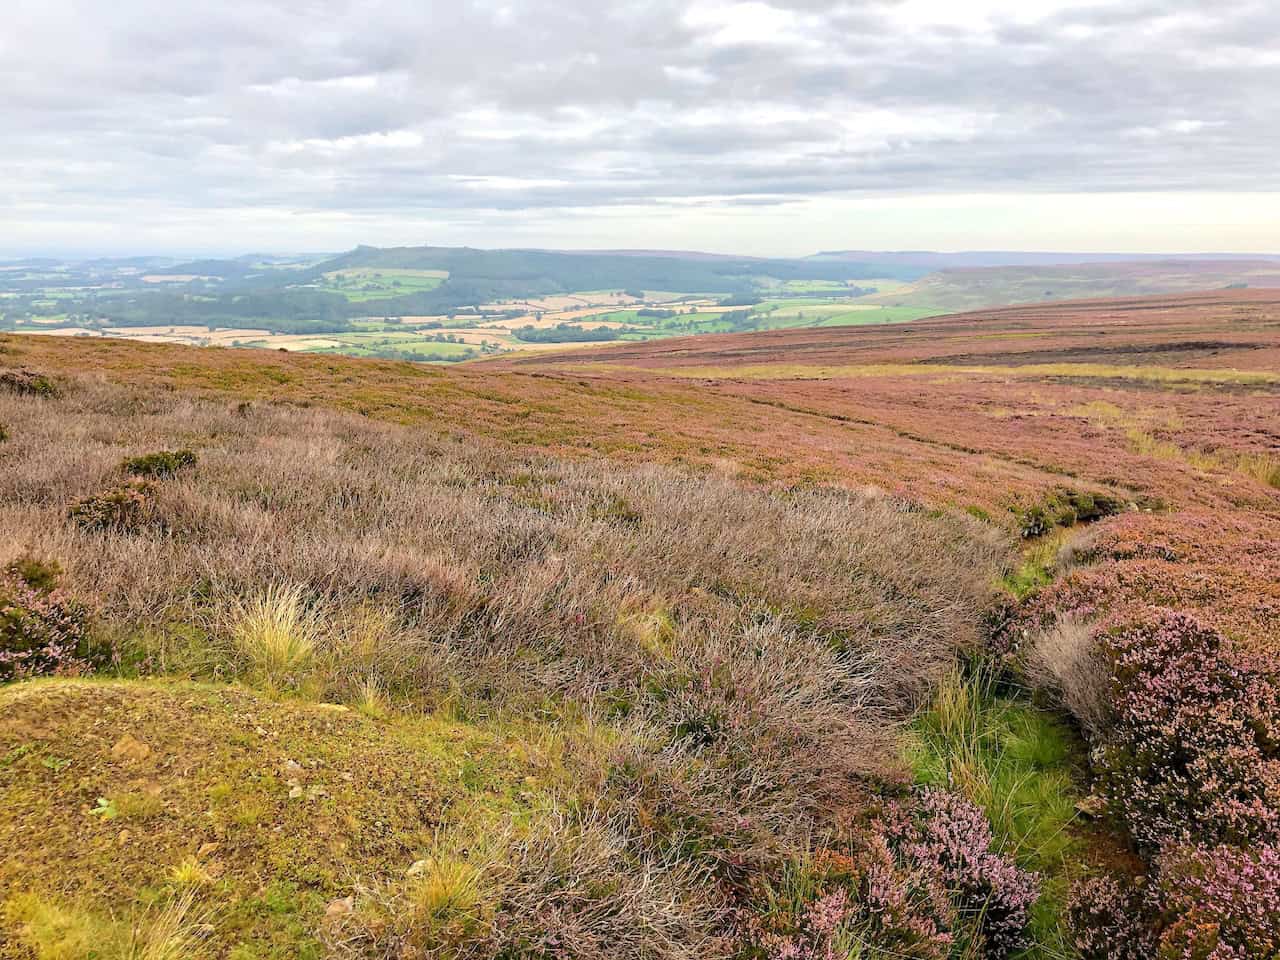 Looking north from the Cleveland Way on Battersby Moor, you can see the distinctive half-cone summit of Roseberry Topping to the left and Highcliff Nab to the right, which overlooks Guisborough.